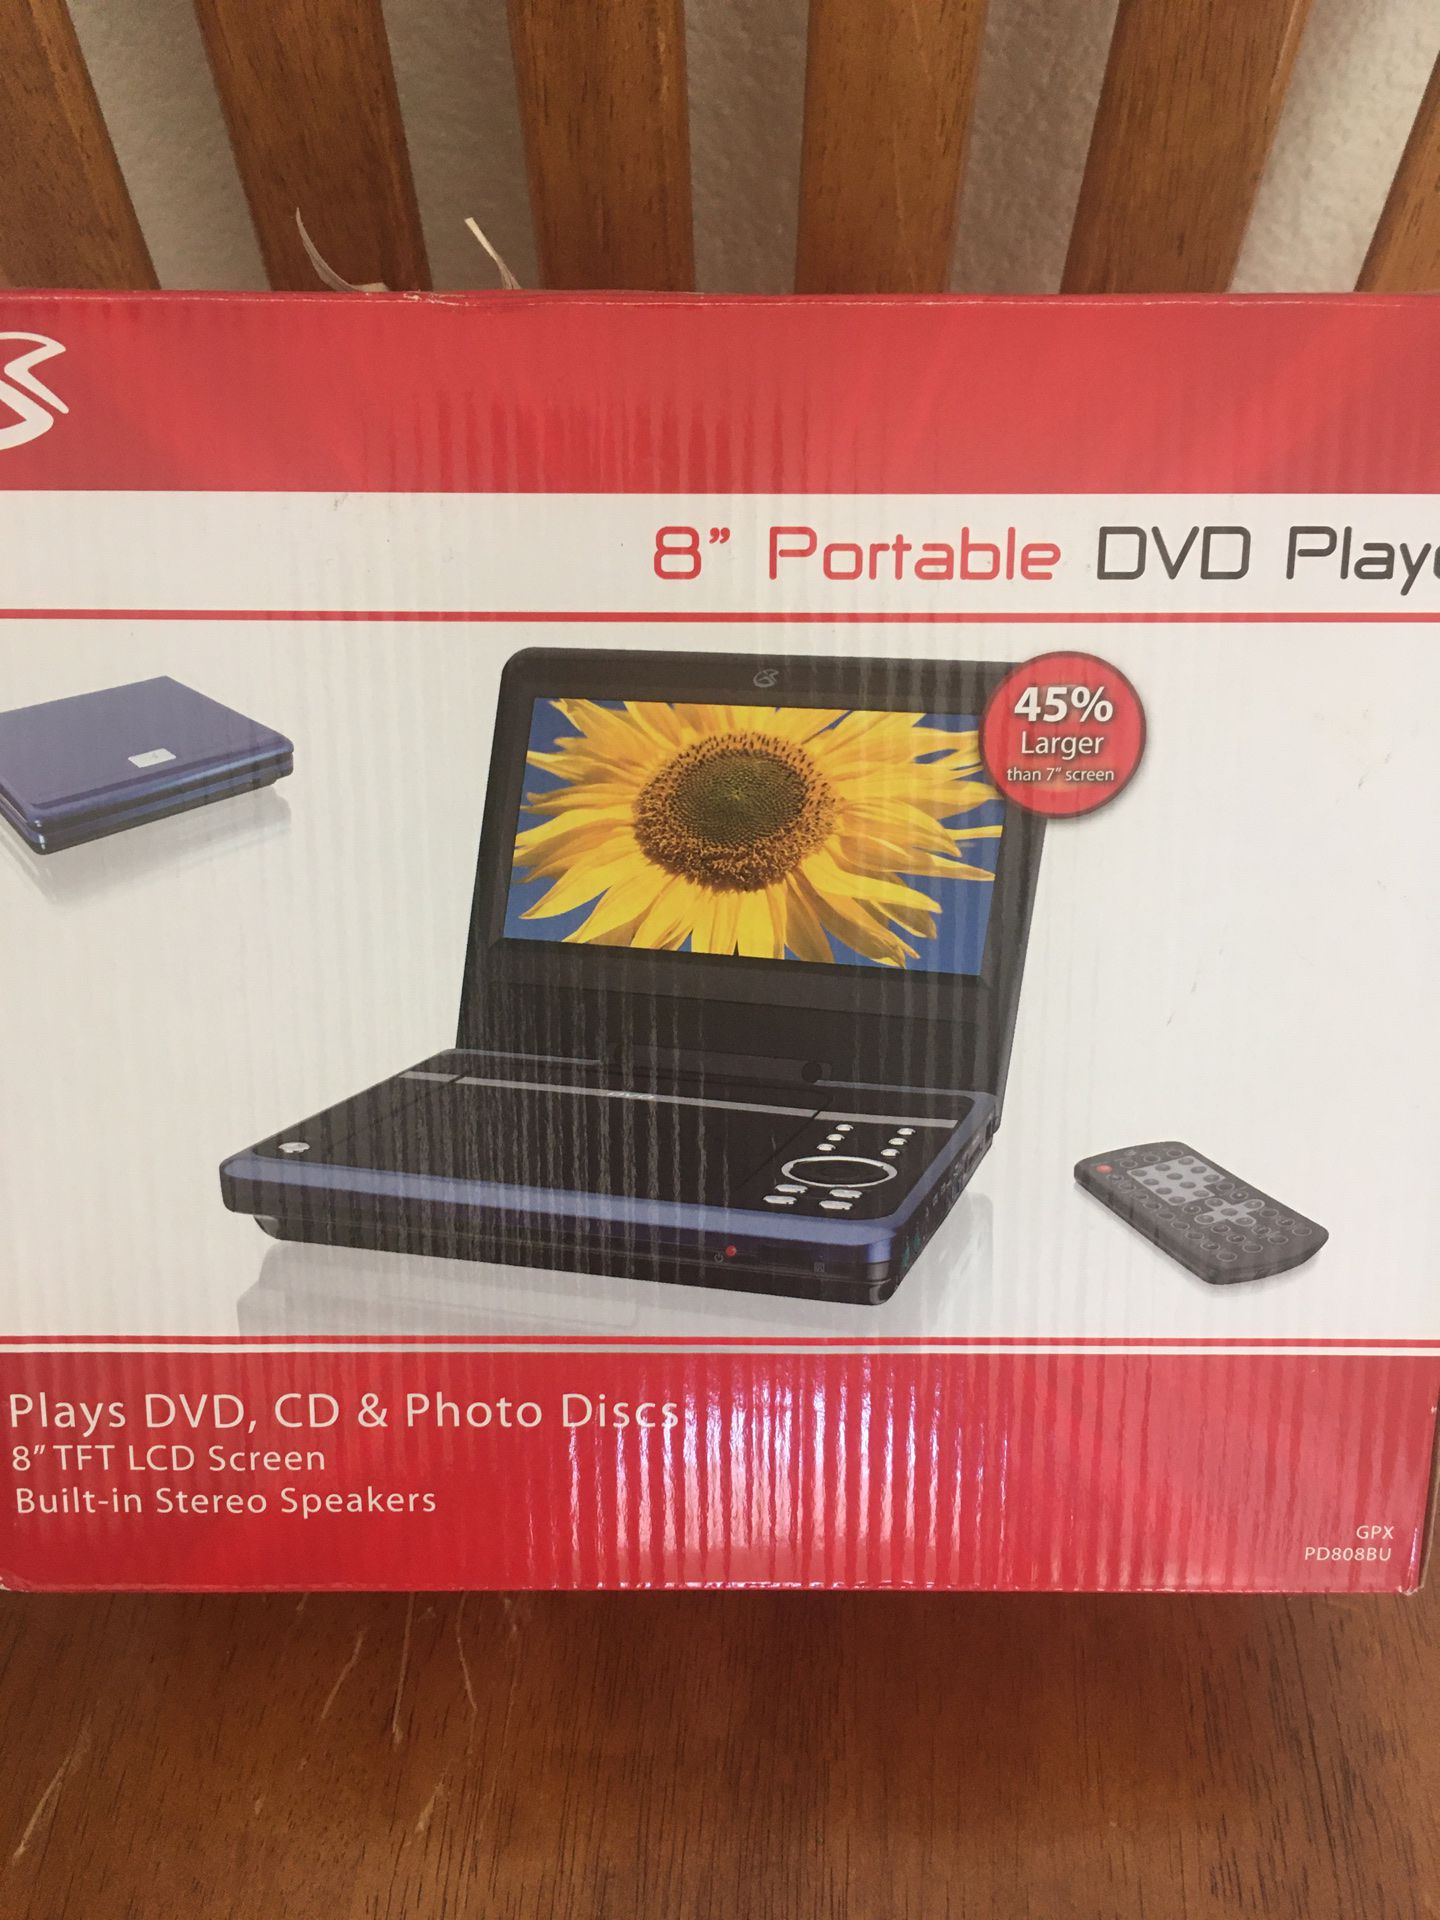 Portable DVD, CD, and photo disc player